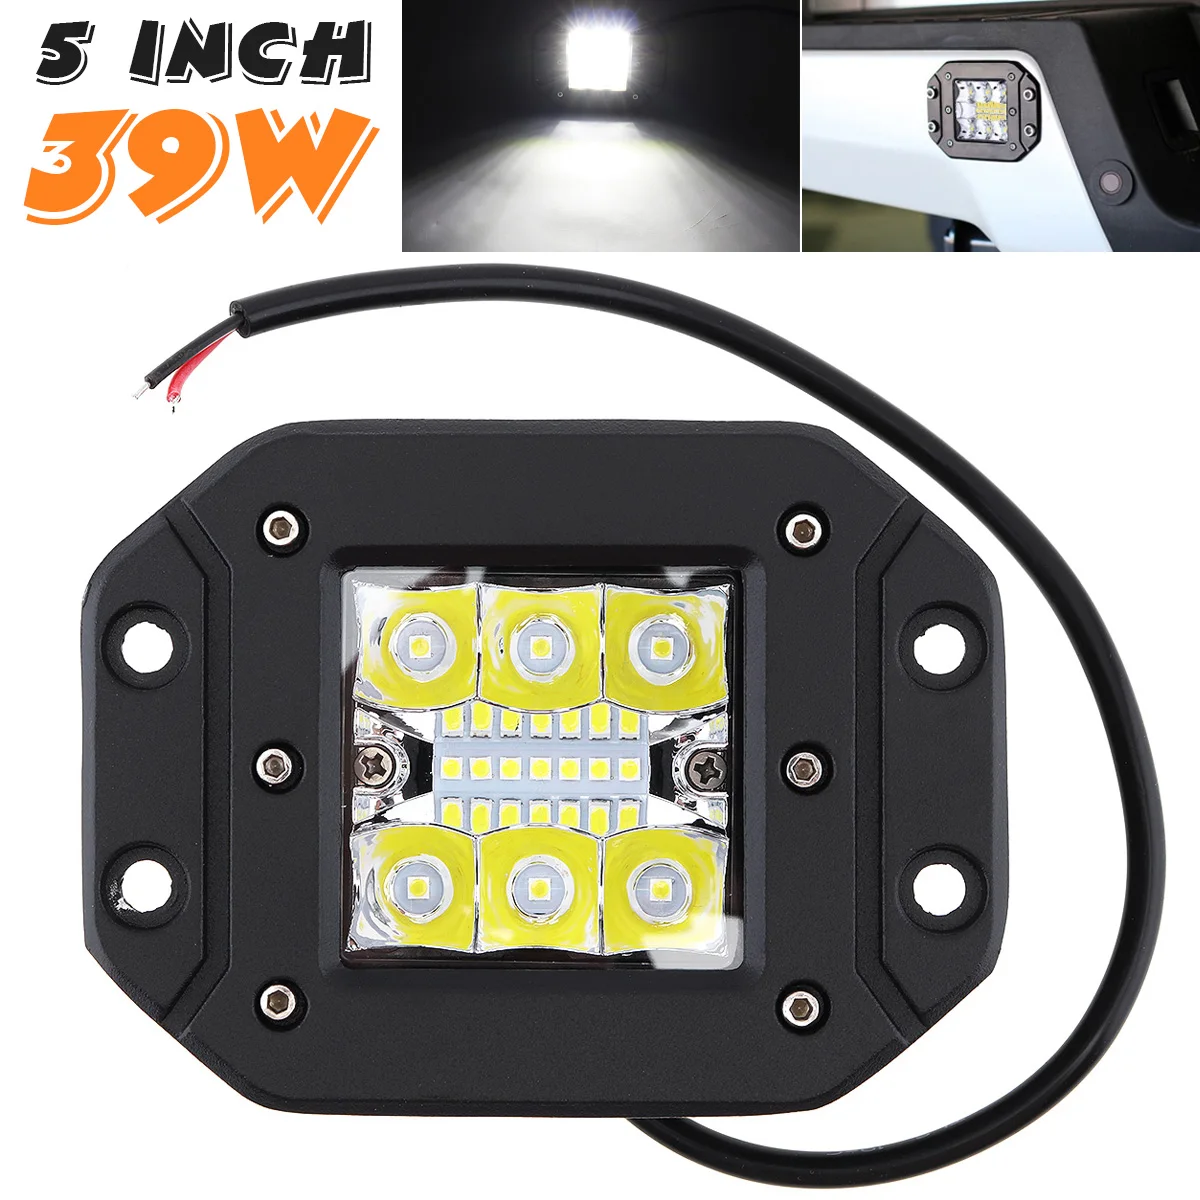 

Ultra Bright 5 Inch 39W LED Light Bar Work Light Fog Lamp for Driving Offroad Boat Car Tractor Truck 4x4 SUV